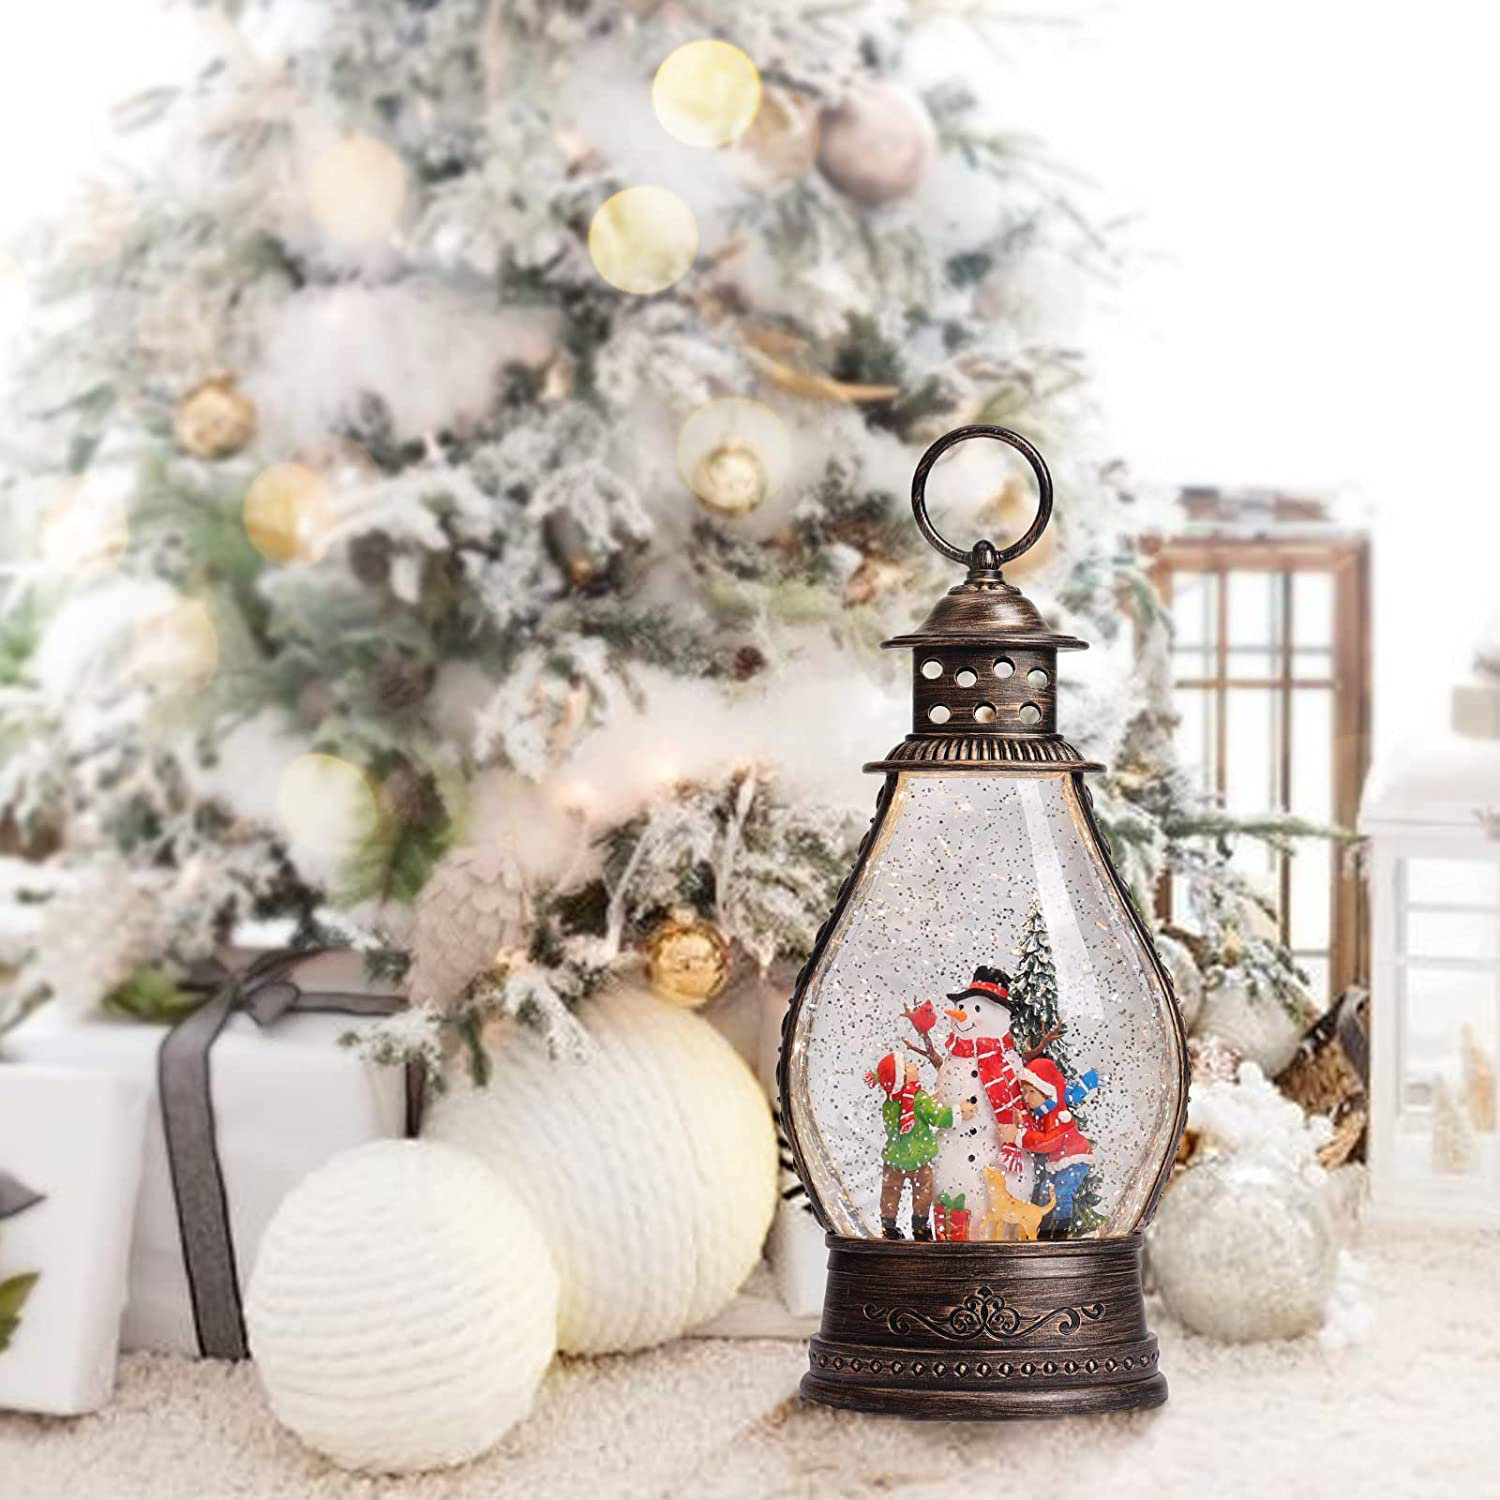 Red Battery Operated Lighted Swirling Glitter Water Lantern with Timer for Christmas Home Decoration Snowman Lucky Star Christmas Snow Globe Lantern with Music